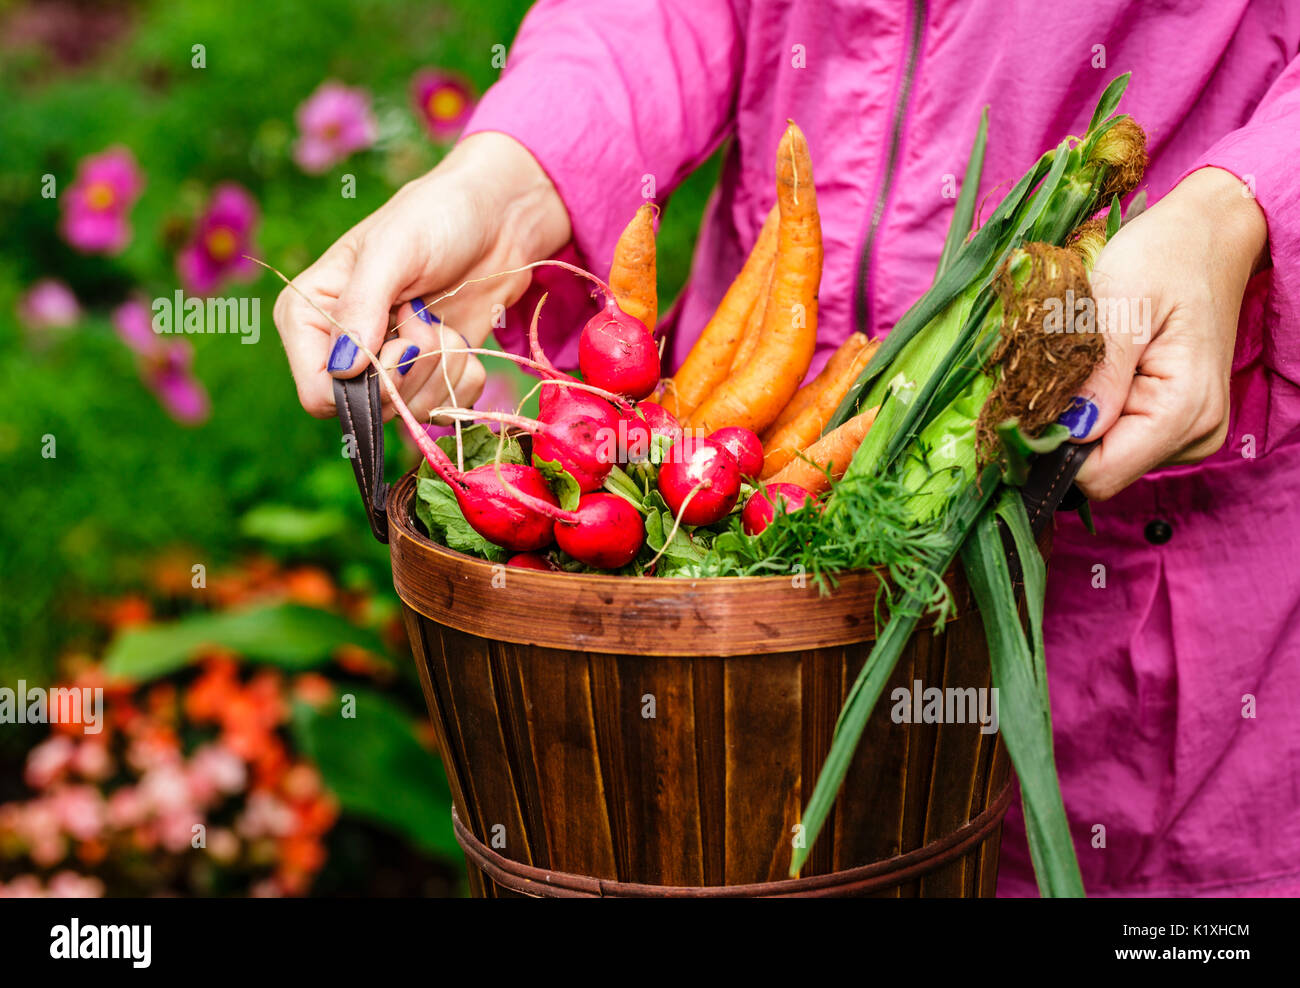 A women in a rain coat holding a brown basket full of freshly picked vegetables.  Fresh carrots, radishes, and corn on the cob are in the basket.  Col Stock Photo